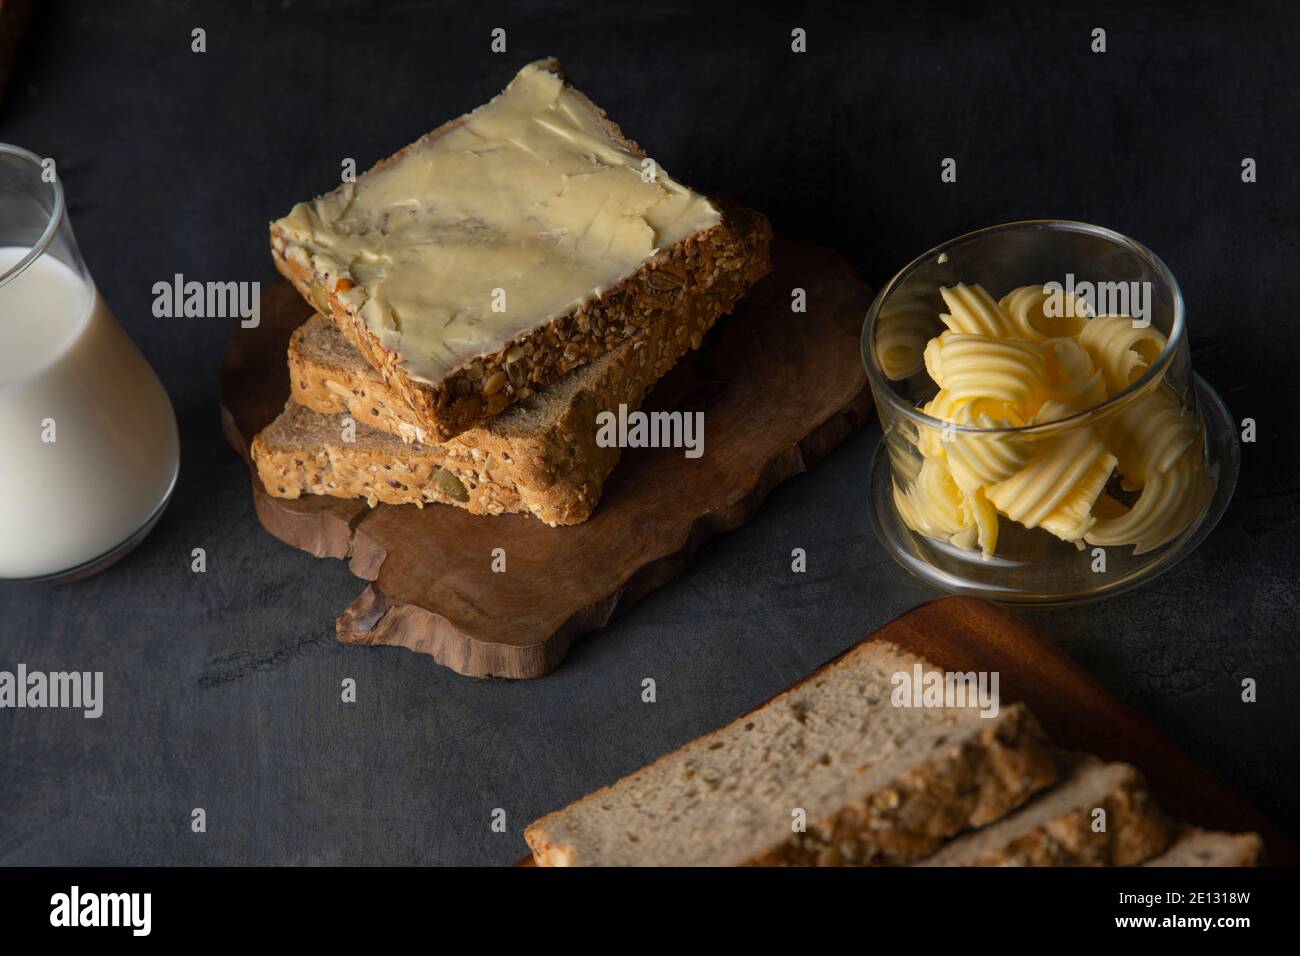 Top view of Bread and butter with a glass of milk Stock Photo